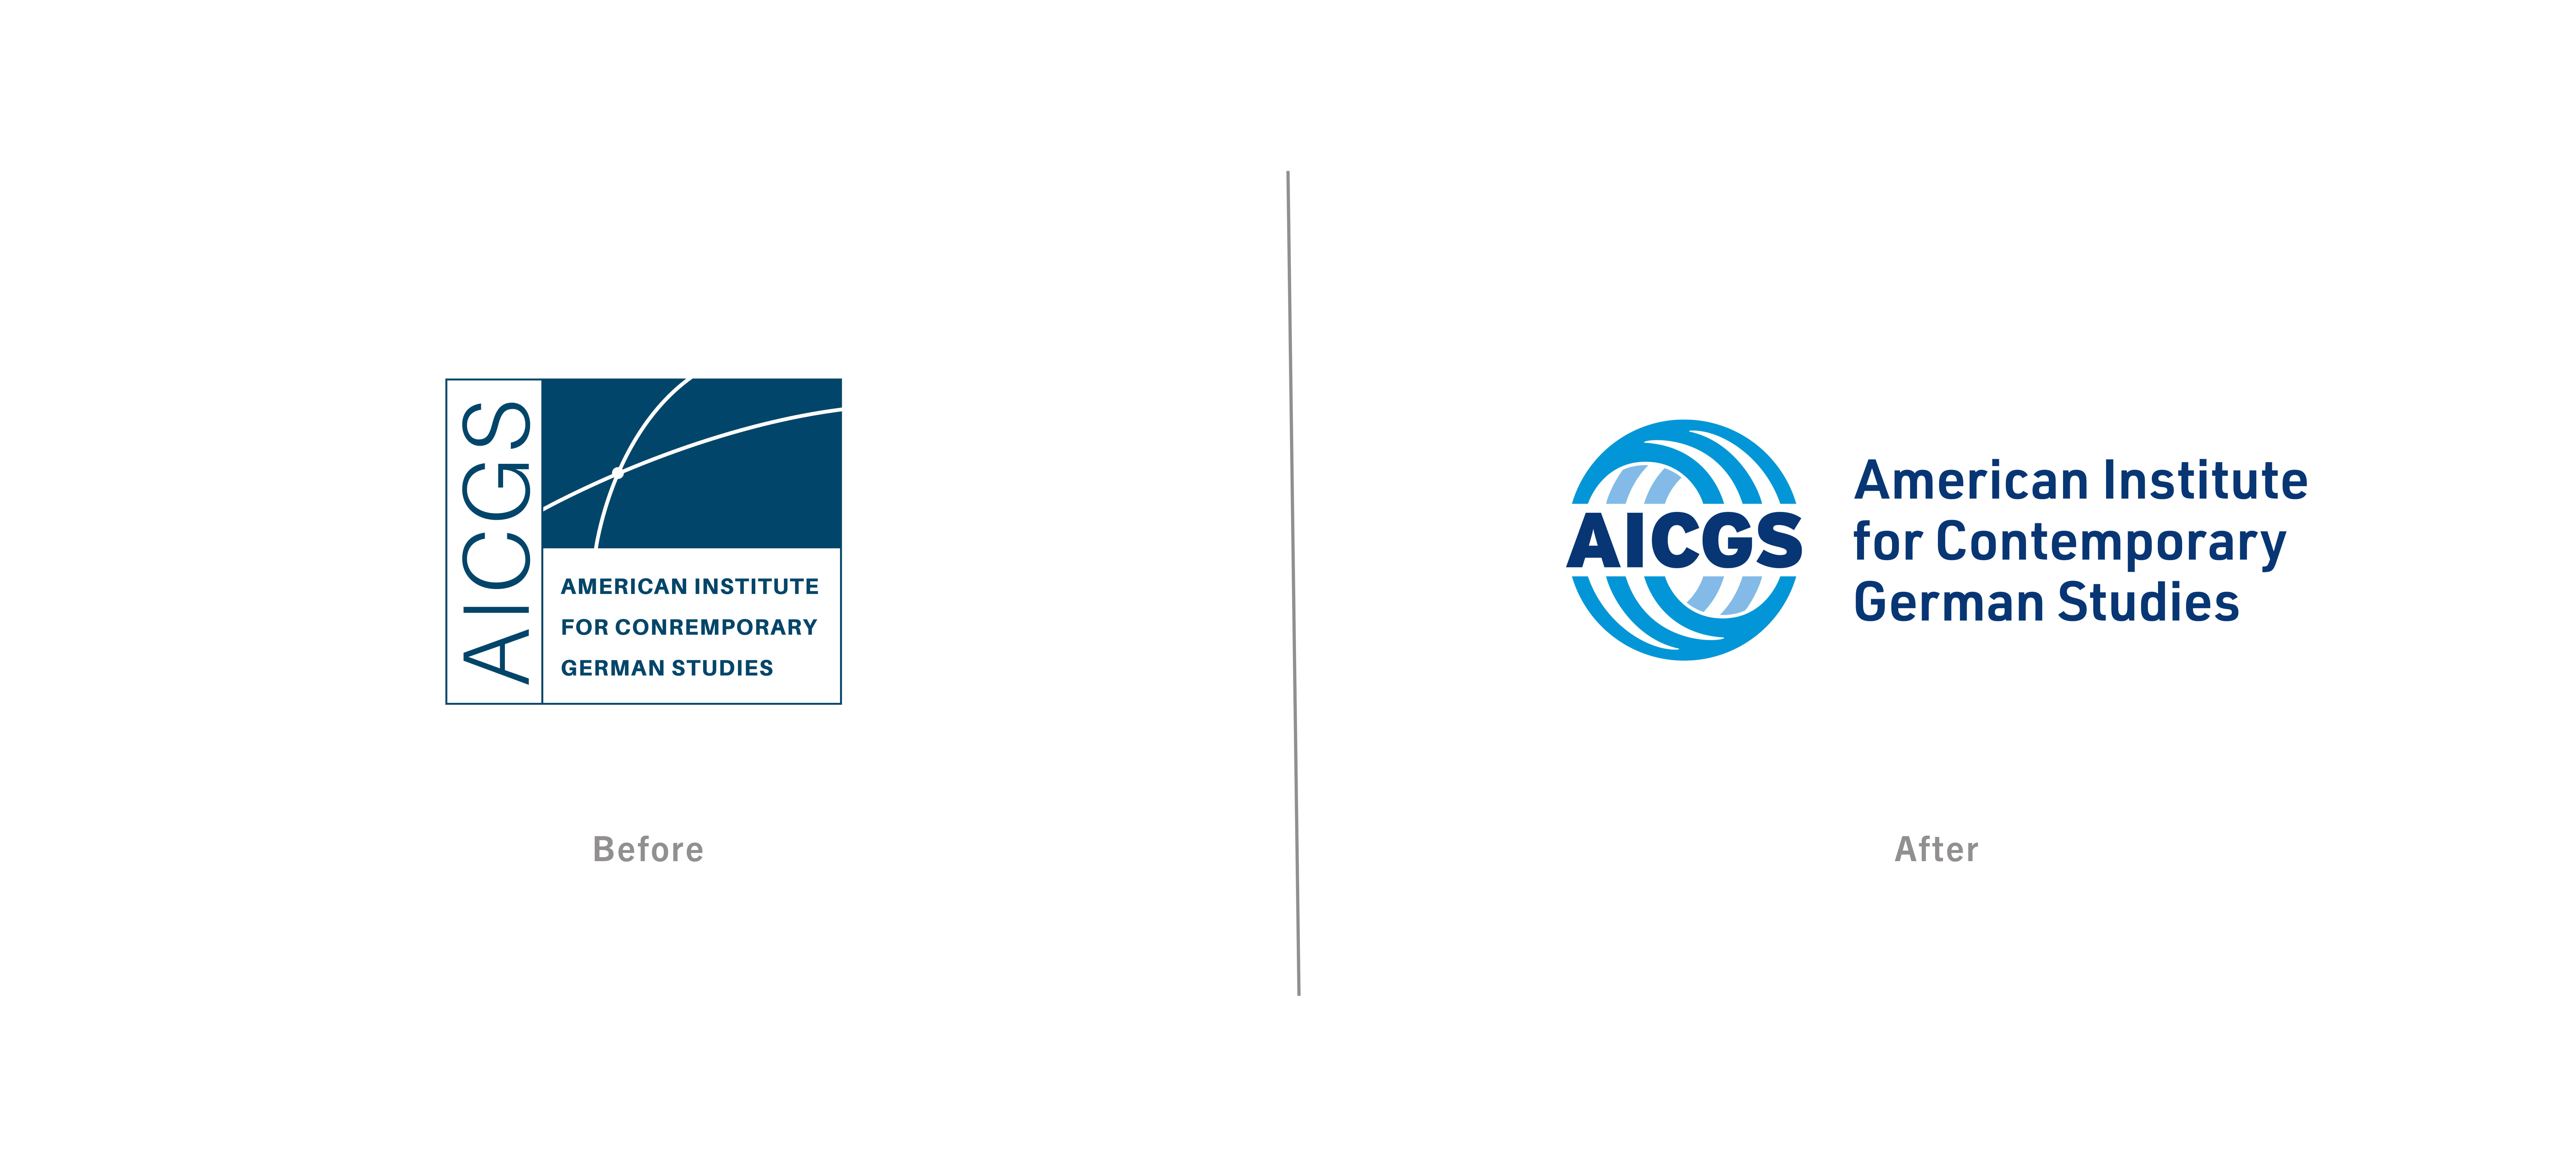 Before and after comparison of the AICGS logo after ob9's rebrand